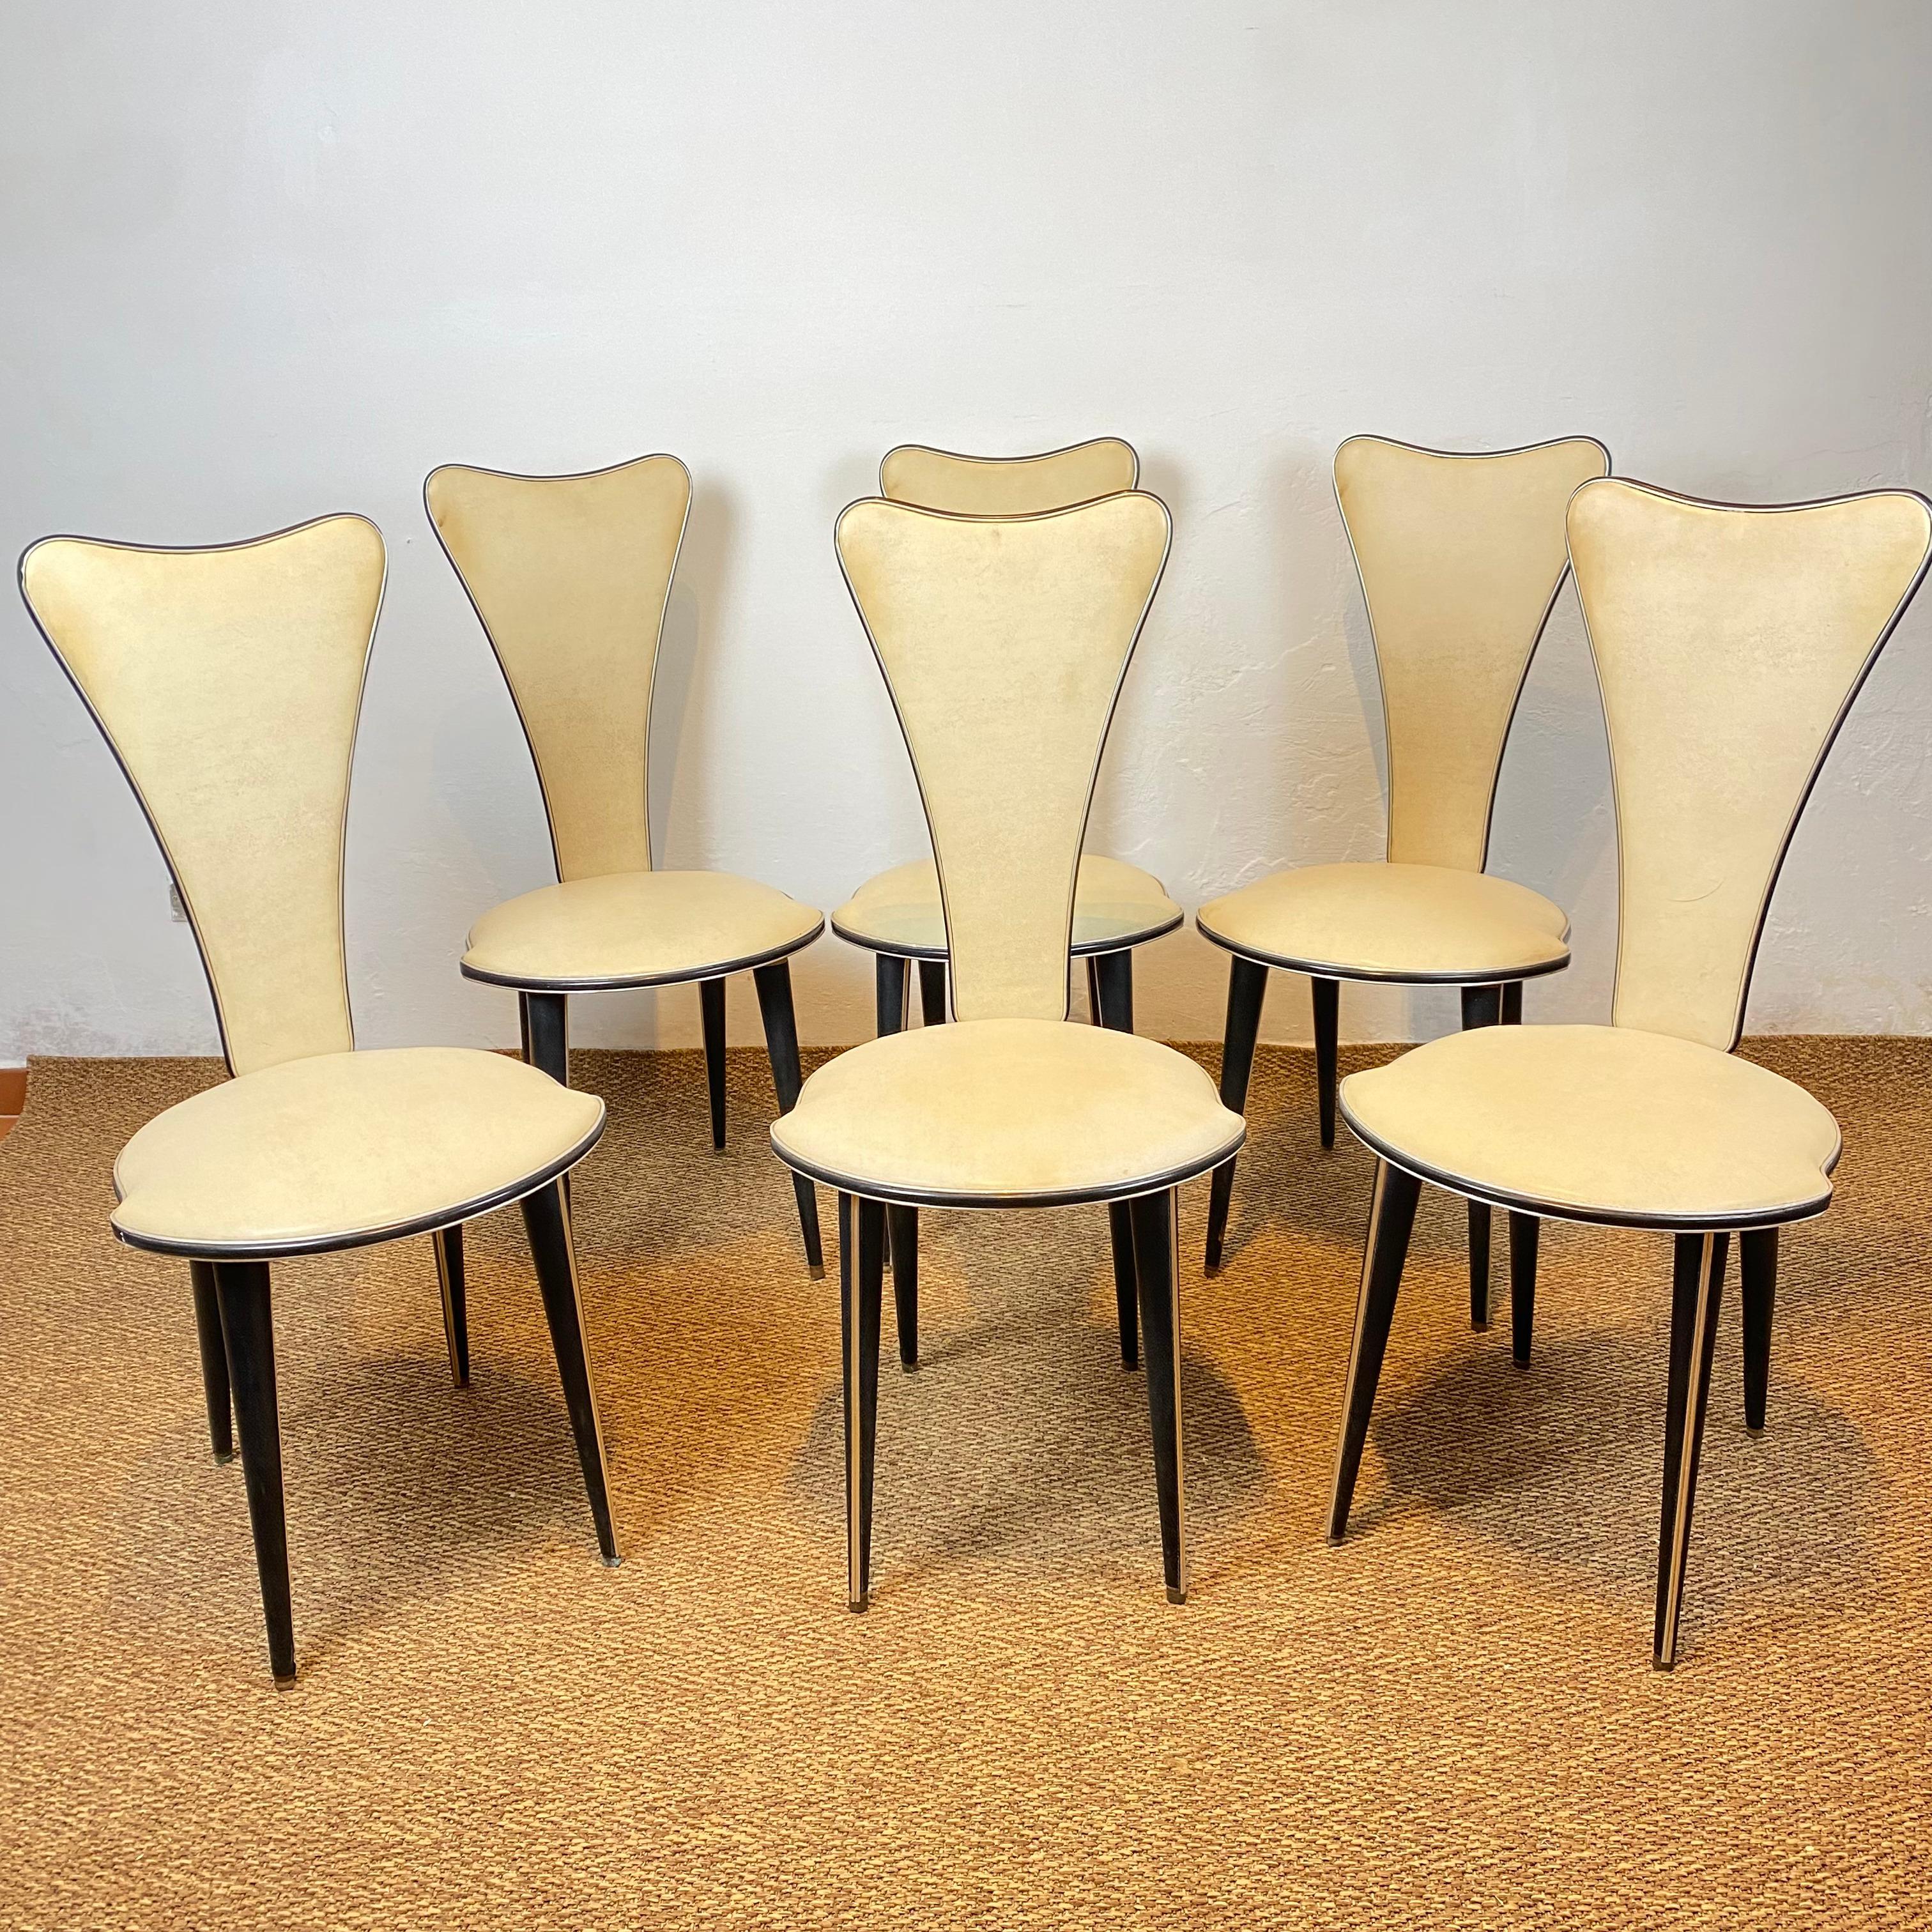 Mid-20th Century Set of Six Chairs by Umberto Mascagni, 1950s